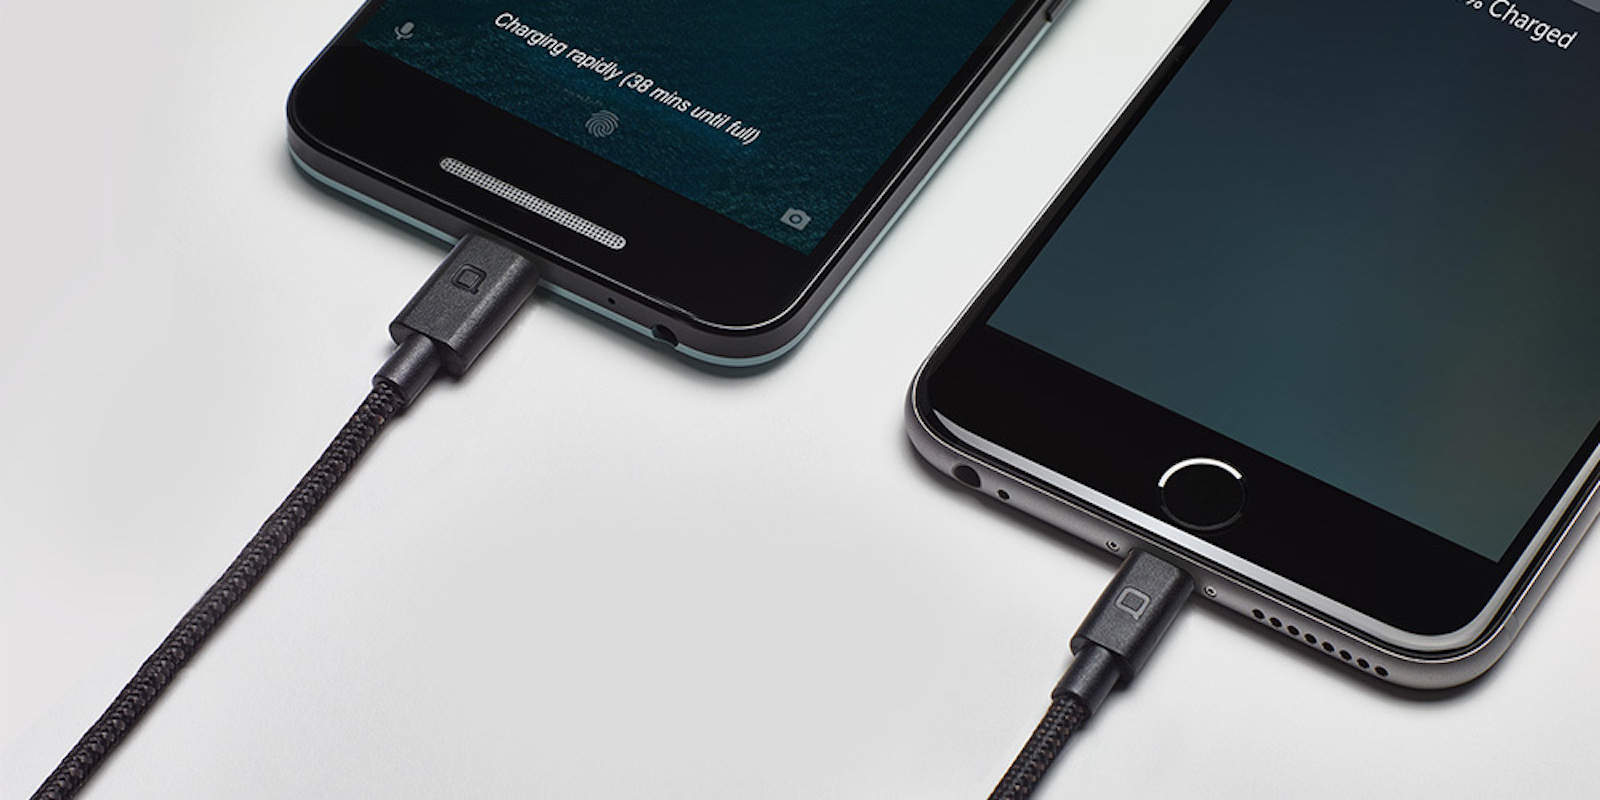 This military-grade kevlar charging cable will stand the test of time